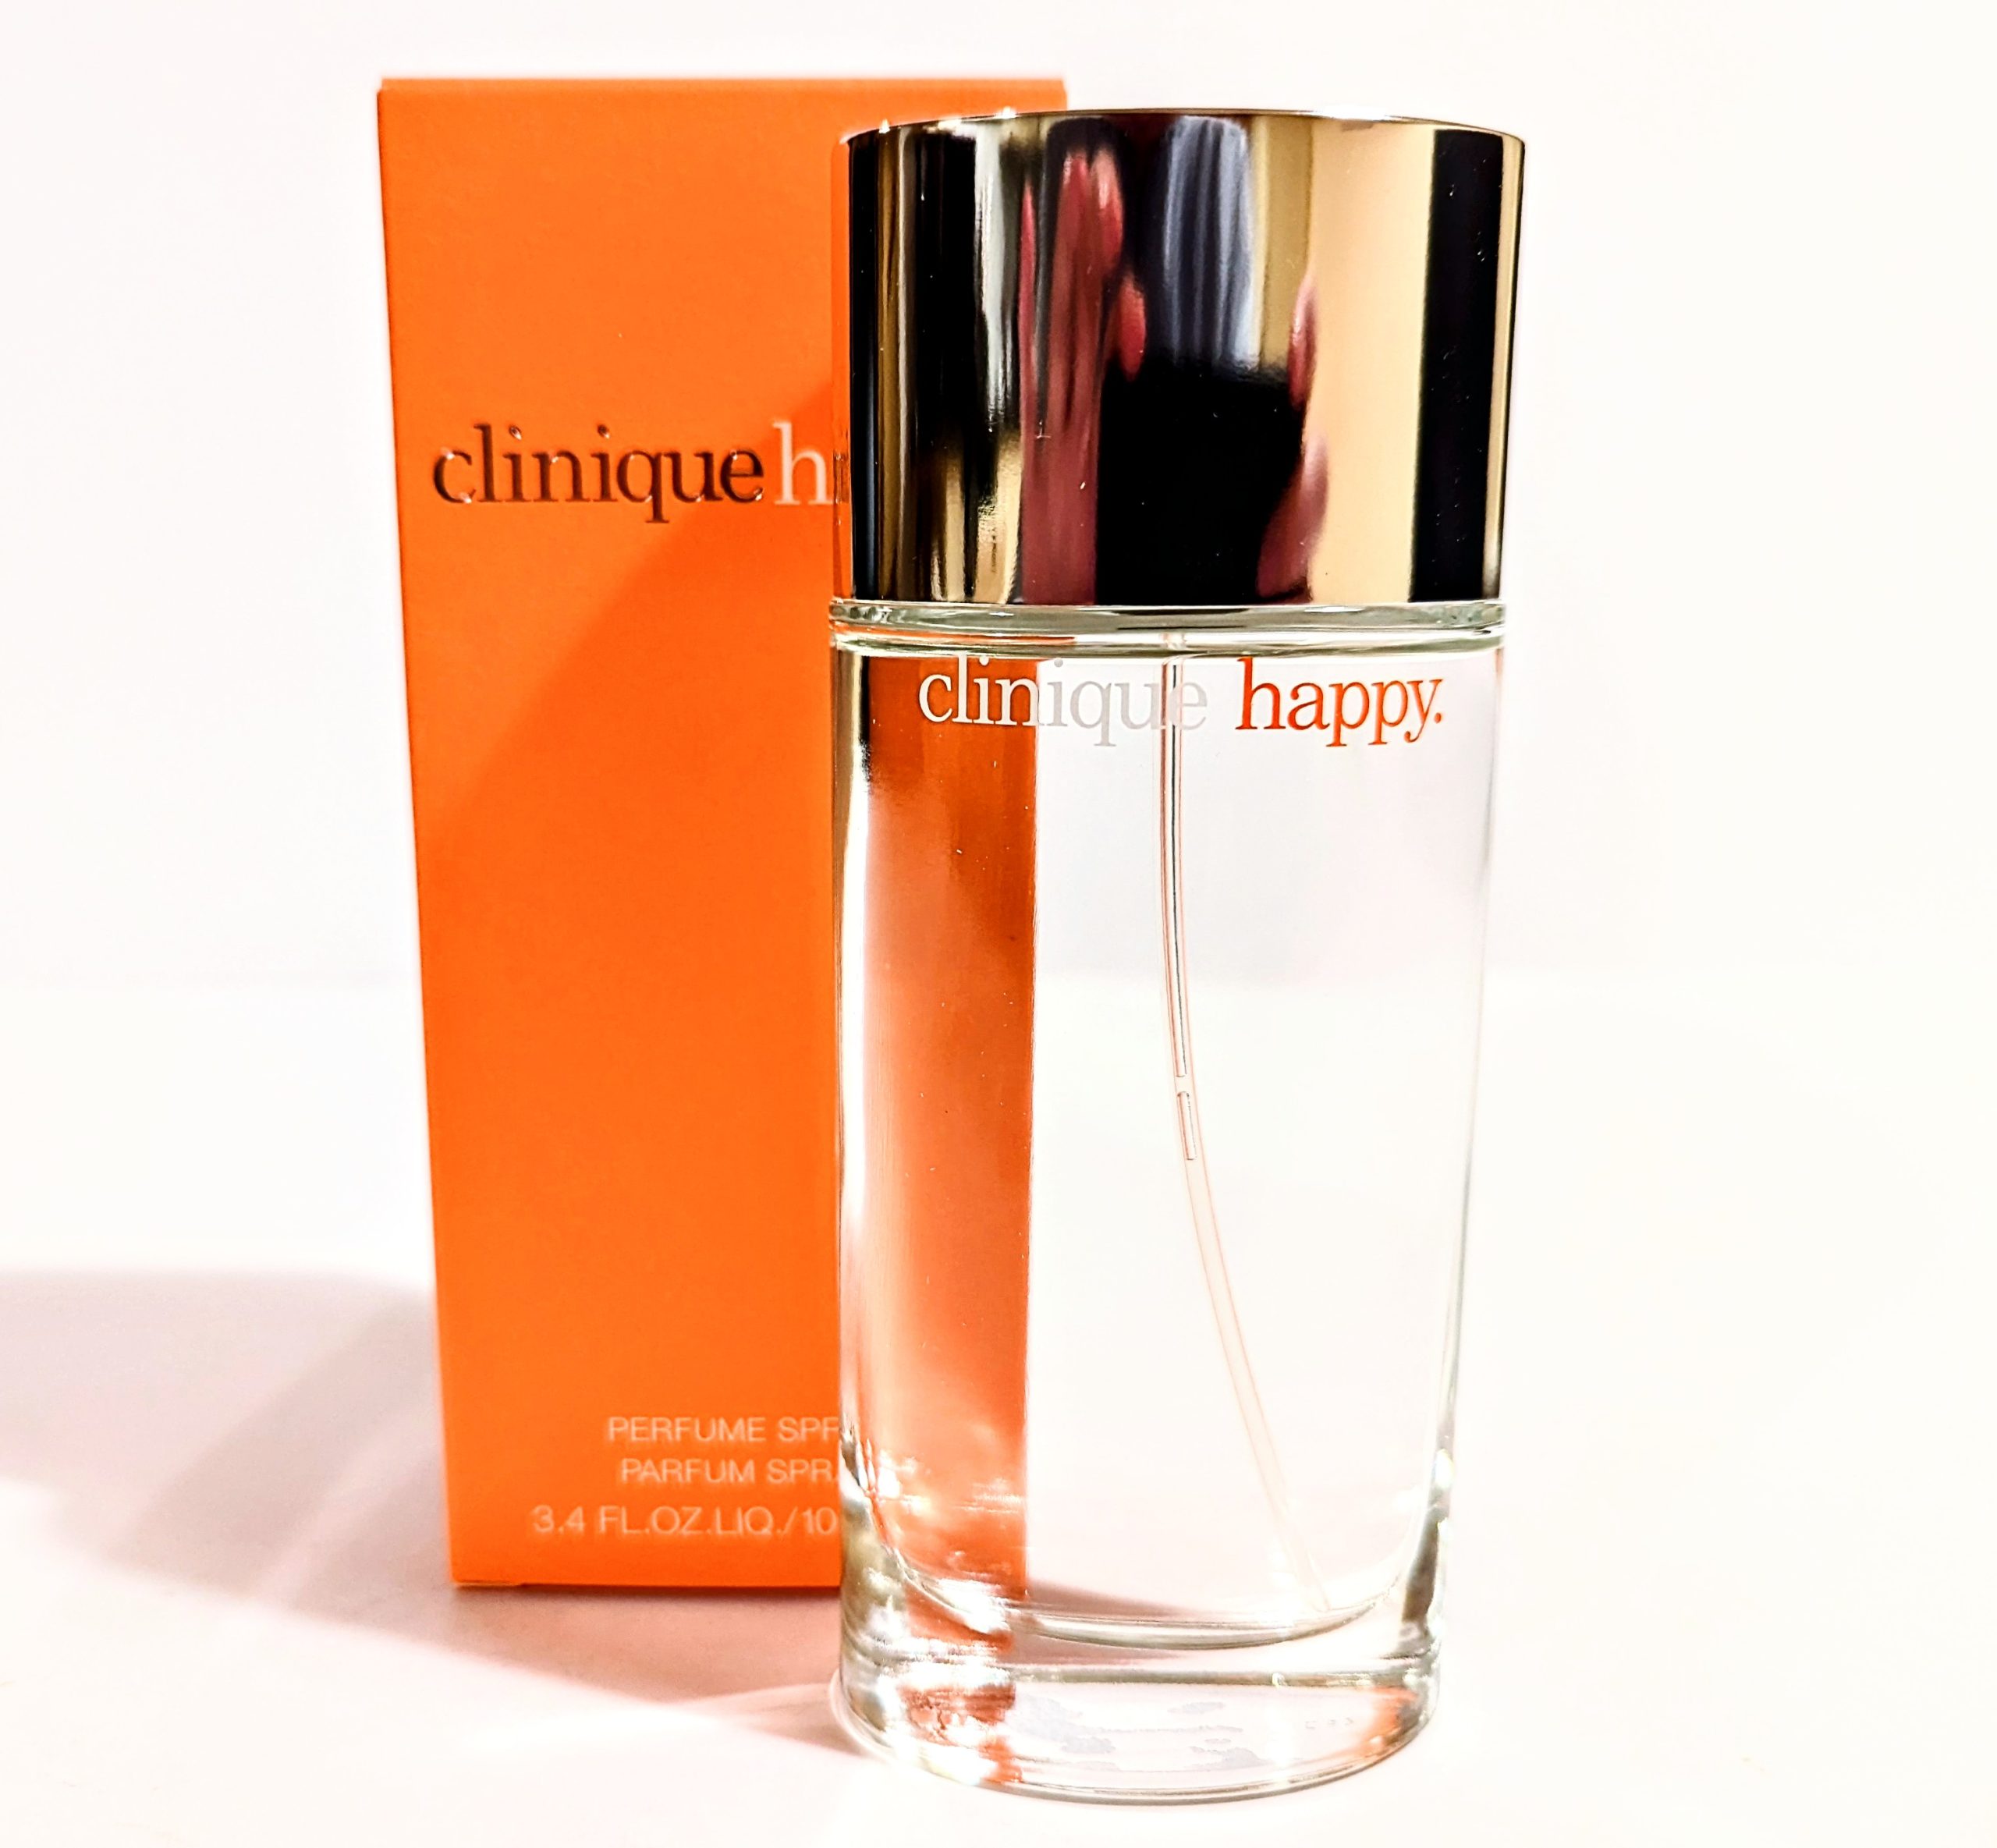 A bottle of Clinique Happy edp in front of a box.